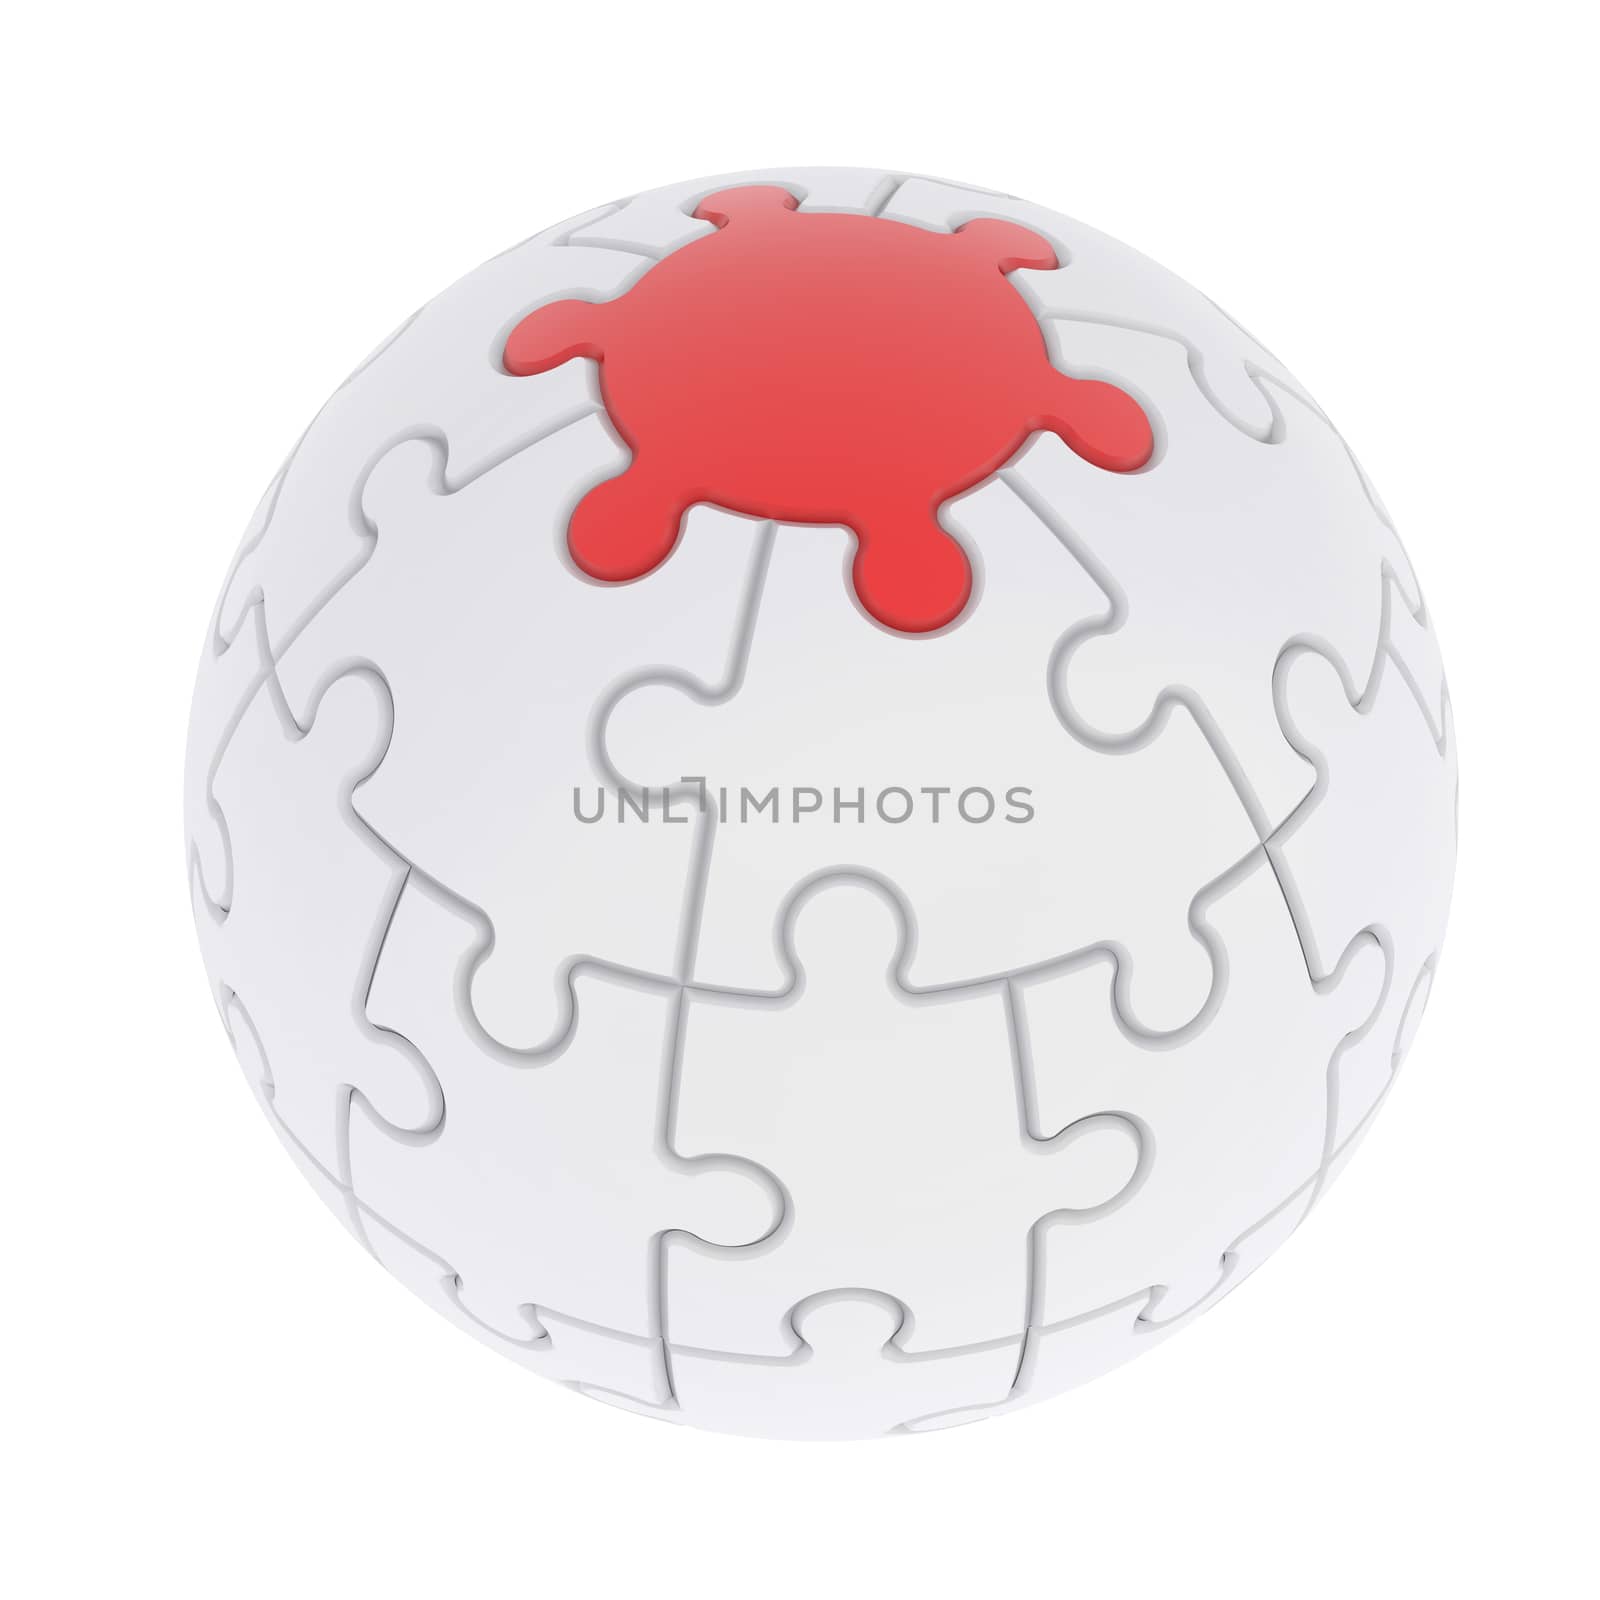 Sphere consisting of puzzles. Isolated render on a white background